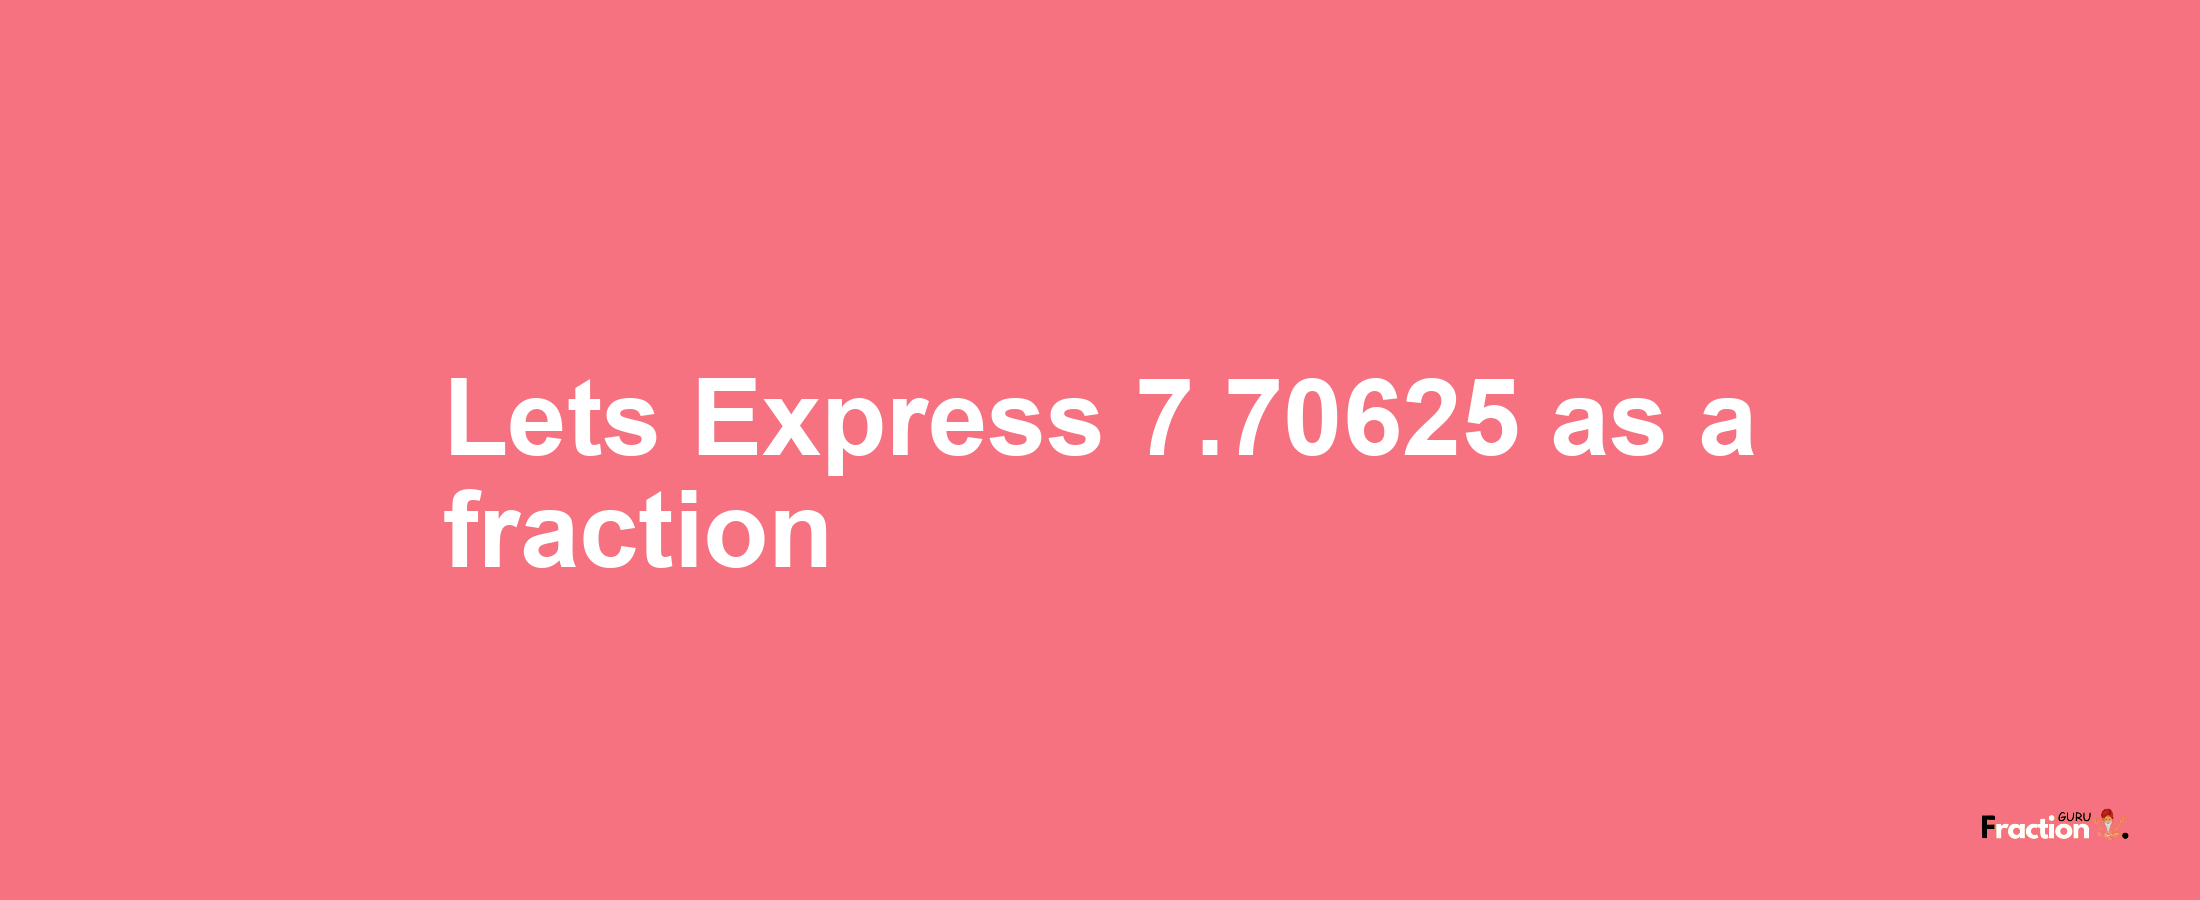 Lets Express 7.70625 as afraction